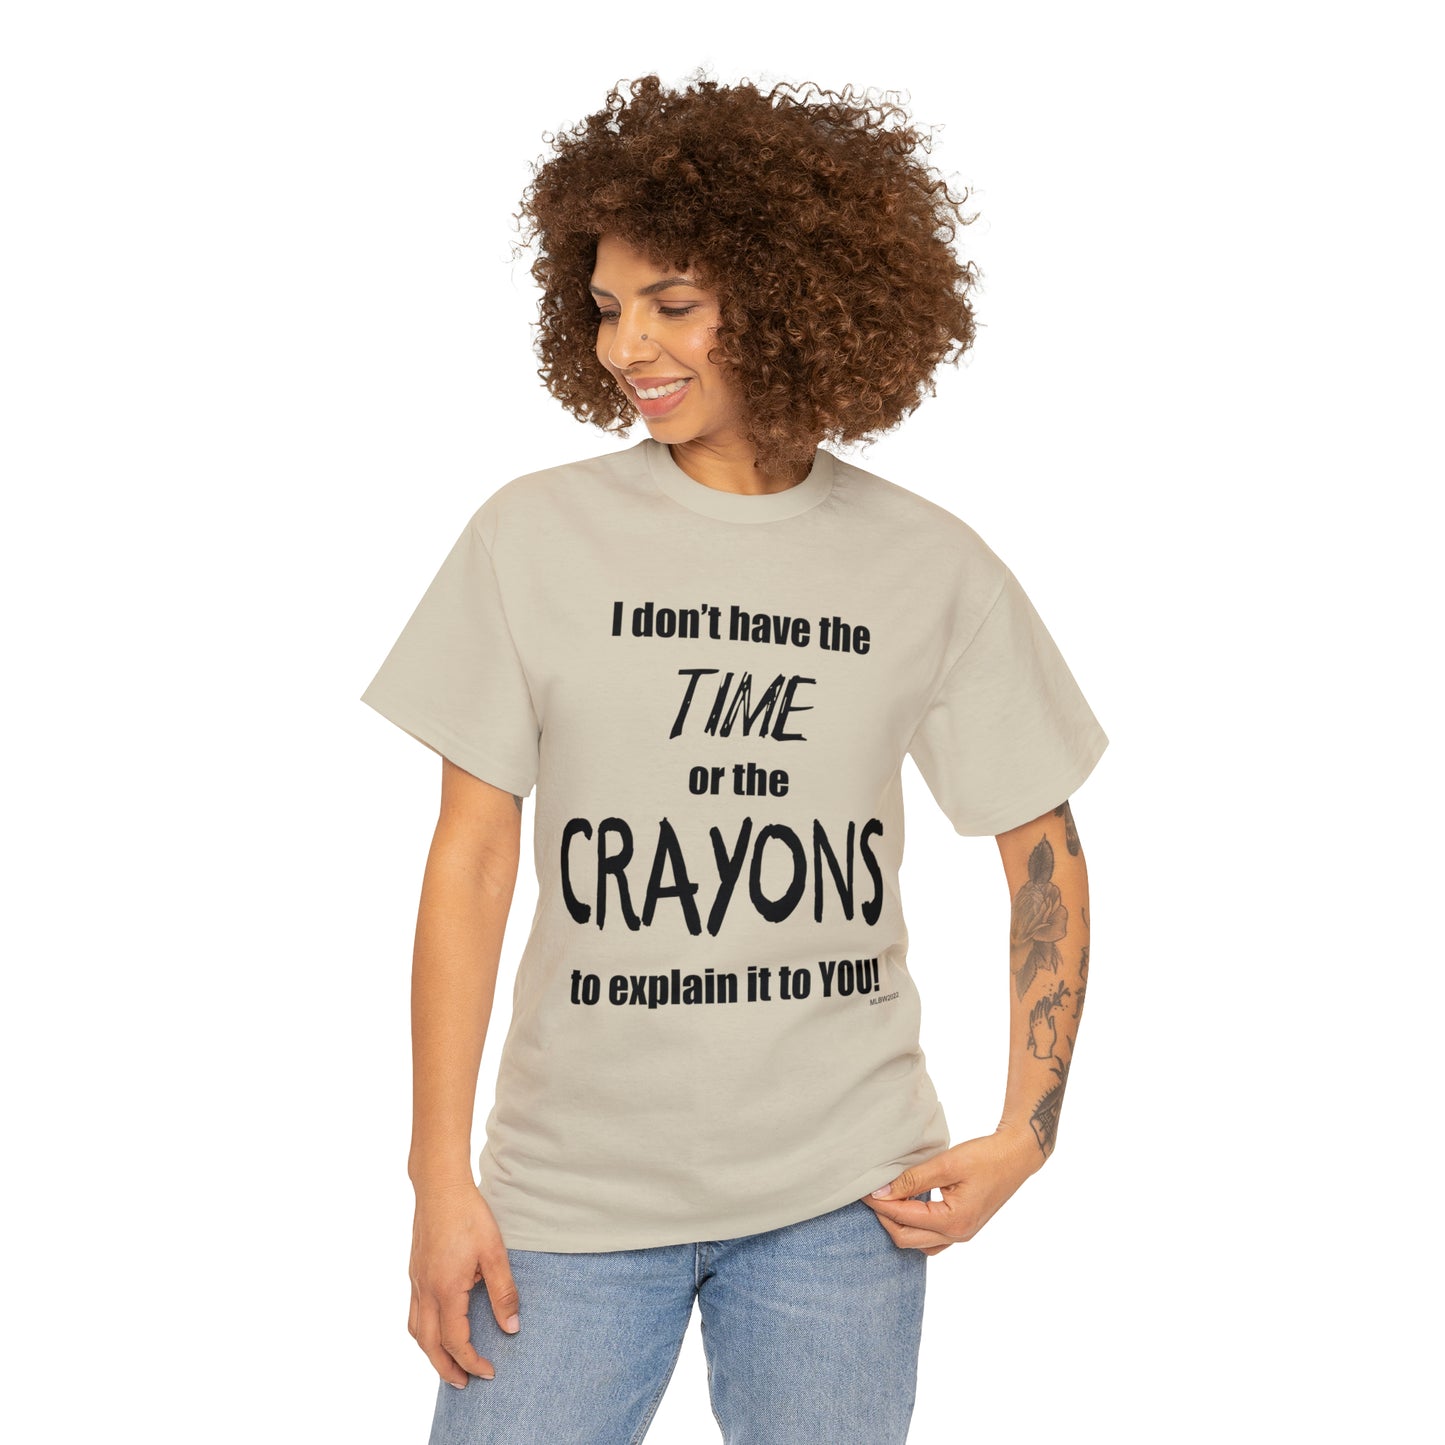 Don't have the TIME or the CRAYONS - Unisex Heavy Cotton Tee (BLACK TEXT) - USA